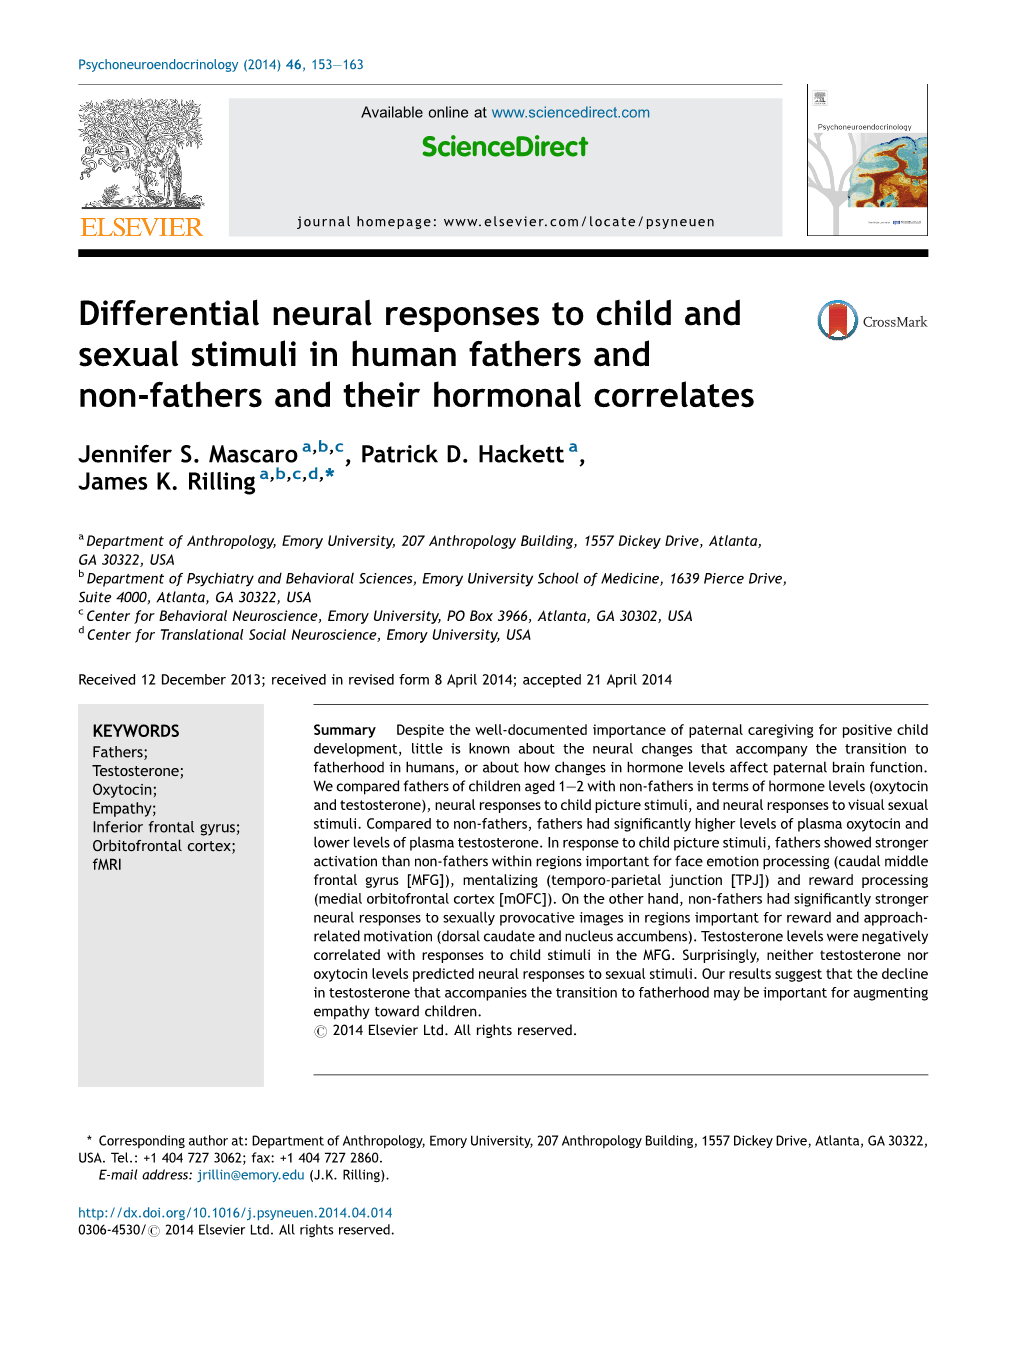 Differential Neural Responses to Child and Sexual Stimuli in Human Fathers